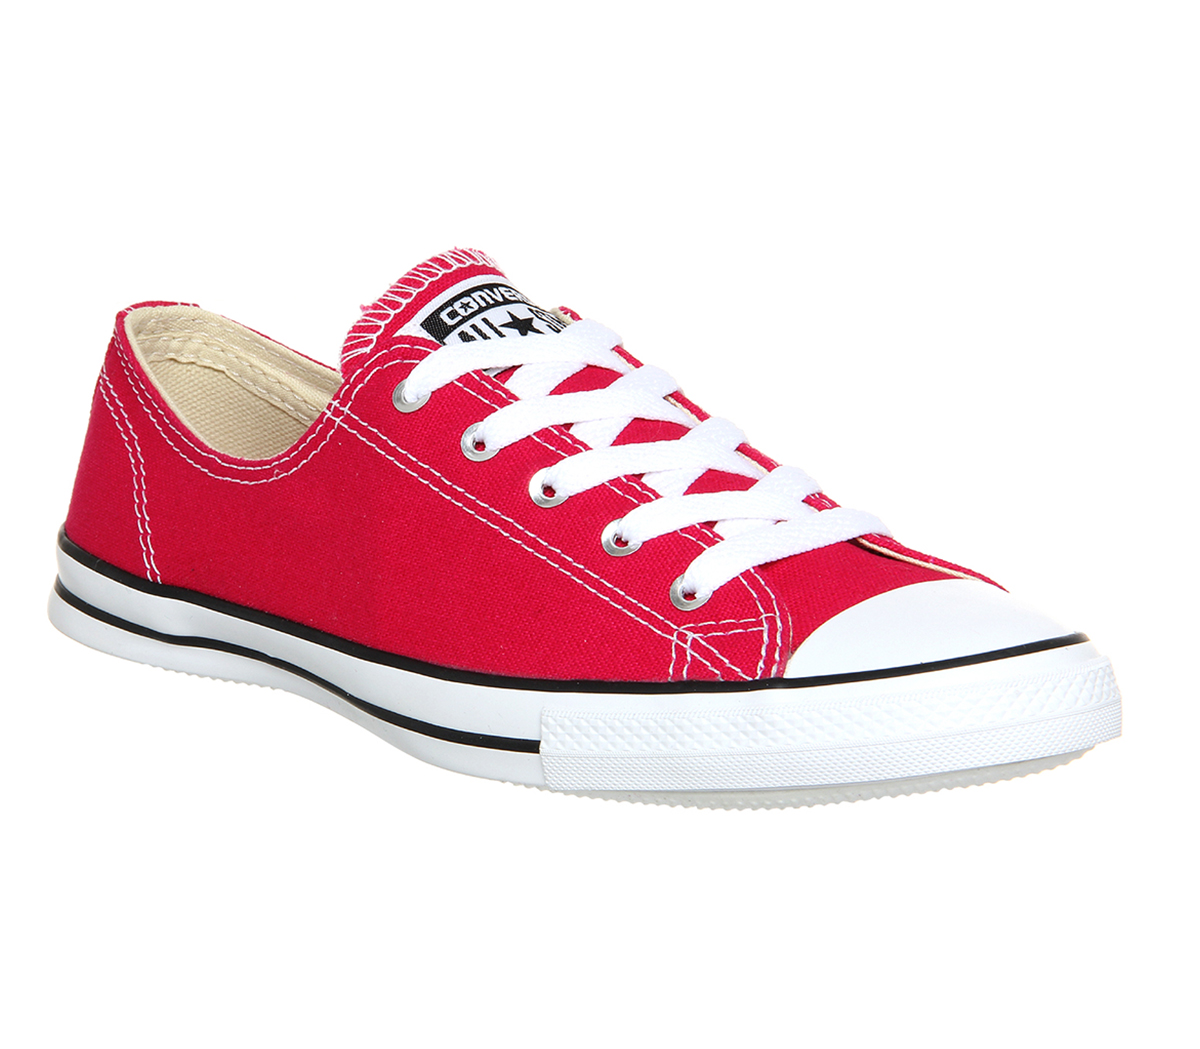 Converse Ctas Fancy Berry Pink Exclusive - Hers Exclusives